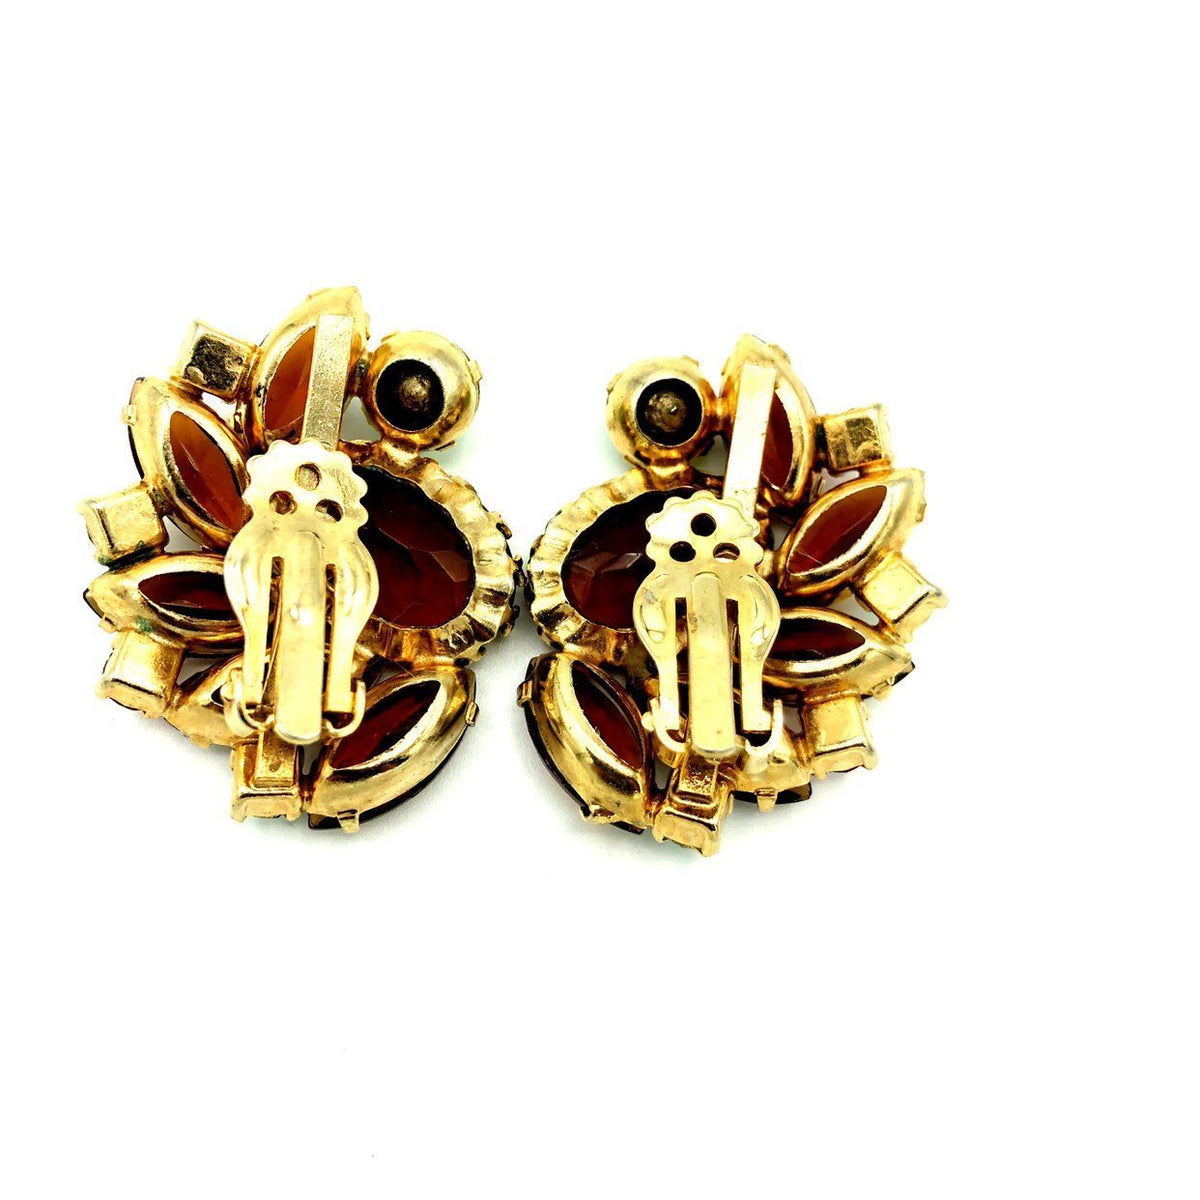 Juliana Delizza and Elster (D&E) Brown Topaz Statement Rhinestone Clip-On Earrings - 24 Wishes Vintage Jewelry